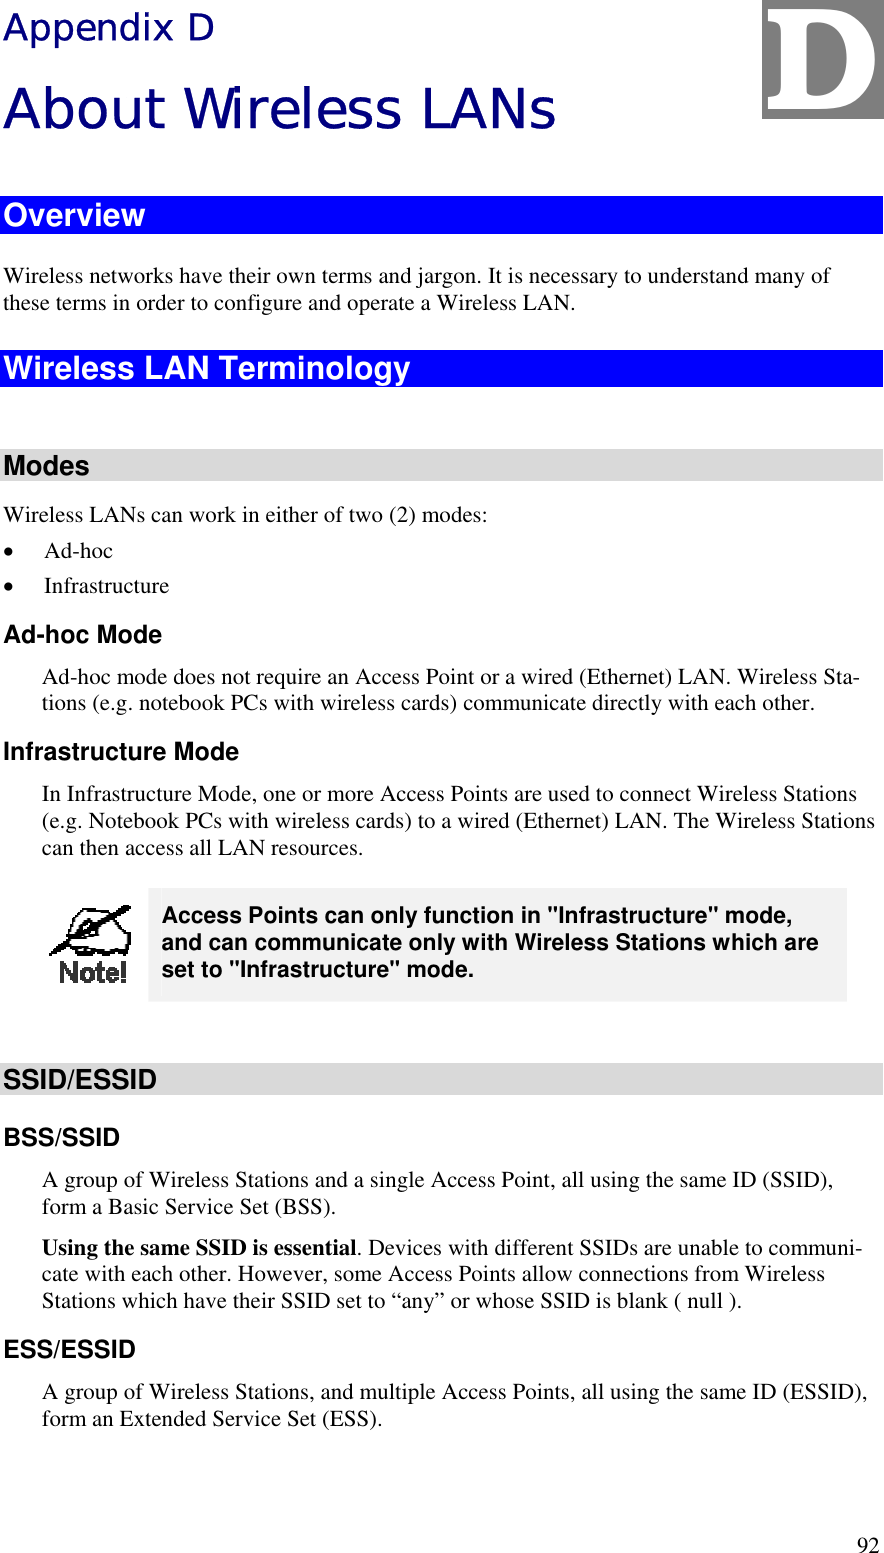  92 Appendix D About Wireless LANs Overview Wireless networks have their own terms and jargon. It is necessary to understand many of these terms in order to configure and operate a Wireless LAN. Wireless LAN Terminology  Modes Wireless LANs can work in either of two (2) modes: •  Ad-hoc •  Infrastructure Ad-hoc Mode Ad-hoc mode does not require an Access Point or a wired (Ethernet) LAN. Wireless Sta-tions (e.g. notebook PCs with wireless cards) communicate directly with each other. Infrastructure Mode In Infrastructure Mode, one or more Access Points are used to connect Wireless Stations (e.g. Notebook PCs with wireless cards) to a wired (Ethernet) LAN. The Wireless Stations can then access all LAN resources.  Access Points can only function in &quot;Infrastructure&quot; mode, and can communicate only with Wireless Stations which are set to &quot;Infrastructure&quot; mode.  SSID/ESSID BSS/SSID A group of Wireless Stations and a single Access Point, all using the same ID (SSID), form a Basic Service Set (BSS). Using the same SSID is essential. Devices with different SSIDs are unable to communi-cate with each other. However, some Access Points allow connections from Wireless Stations which have their SSID set to “any” or whose SSID is blank ( null ). ESS/ESSID A group of Wireless Stations, and multiple Access Points, all using the same ID (ESSID), form an Extended Service Set (ESS). D 